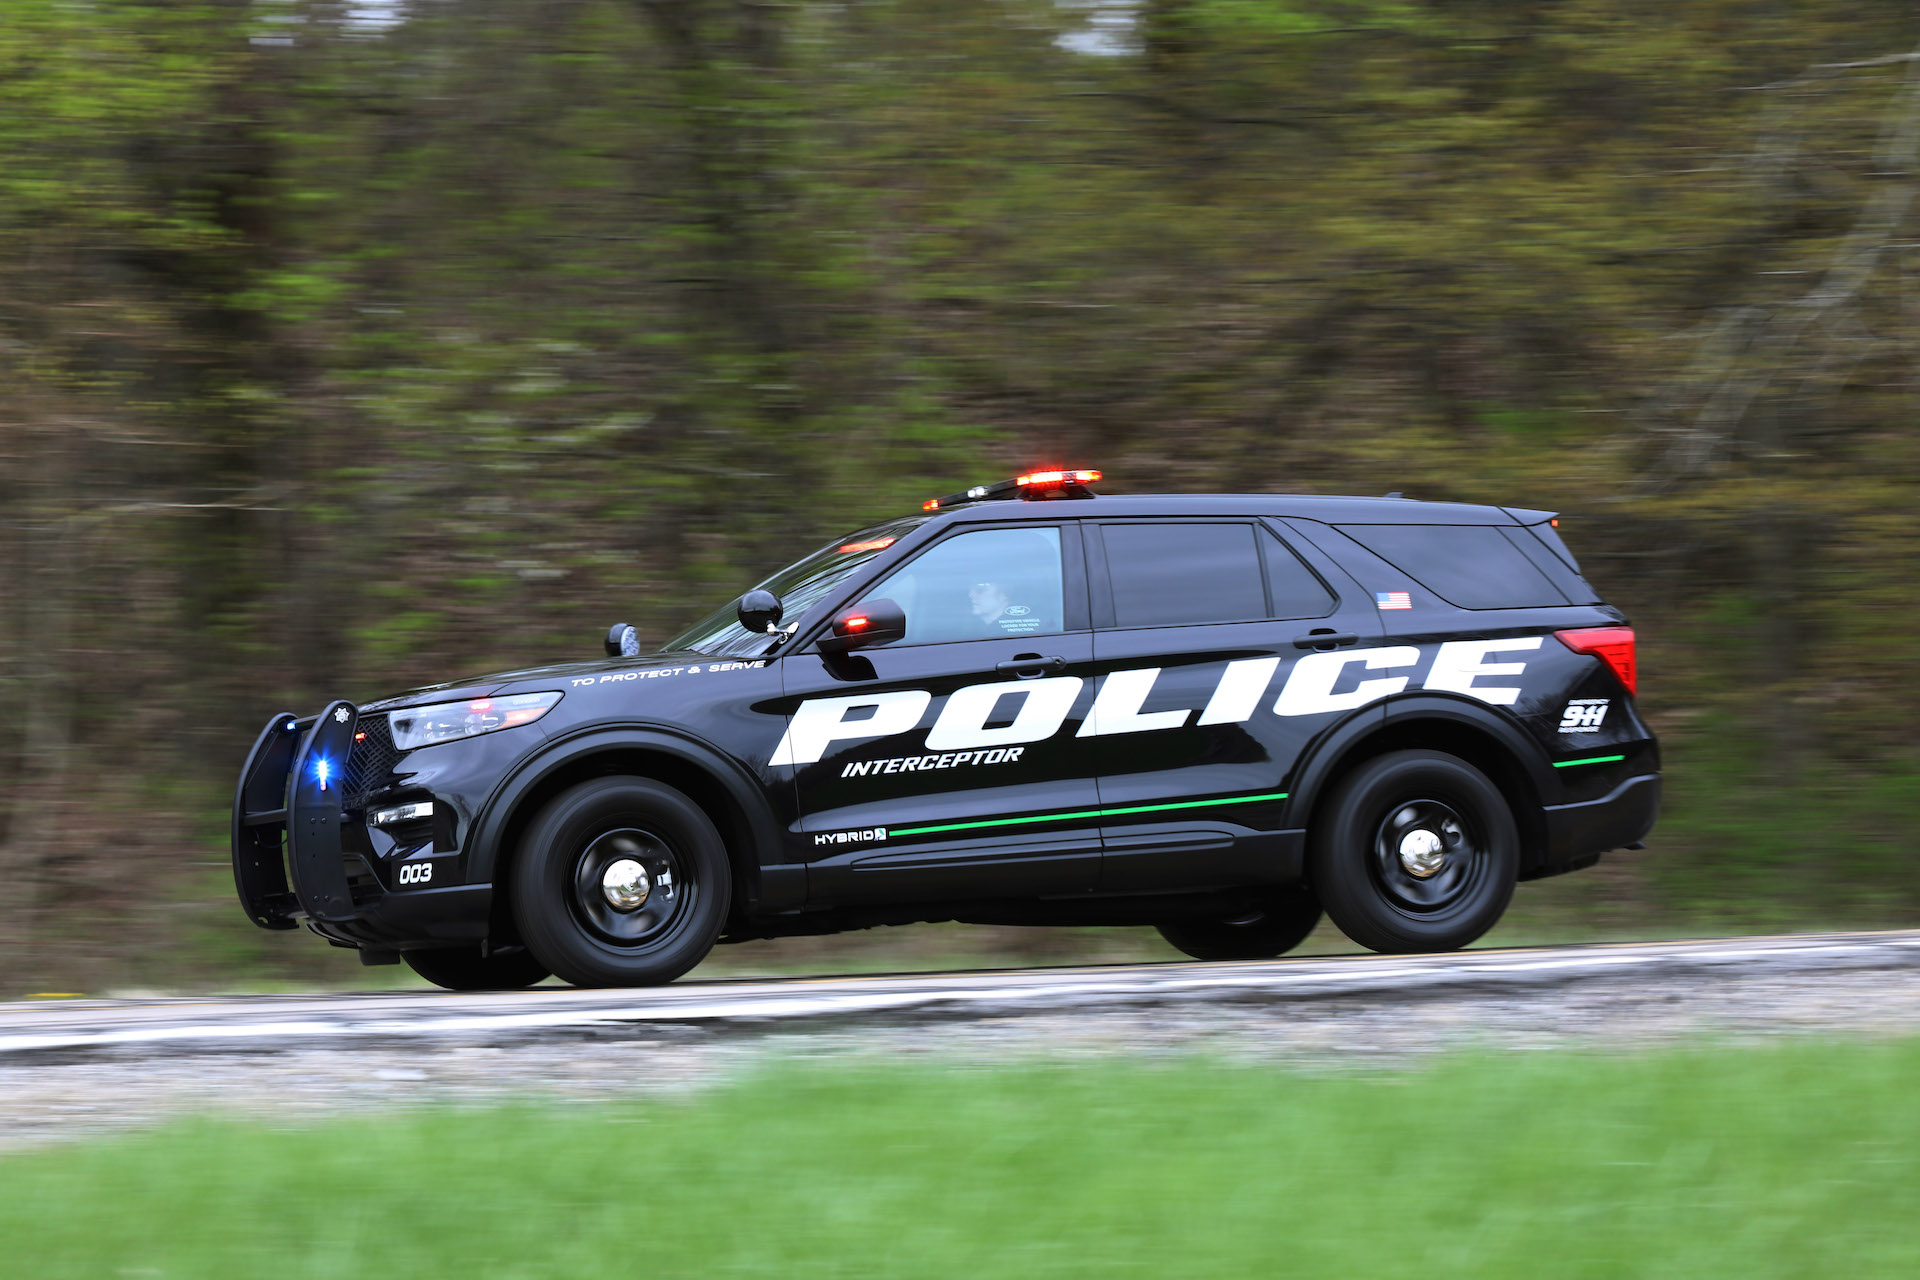 We drove two laps in the new 2020 Ford Explorer Hybrid cop car, here's